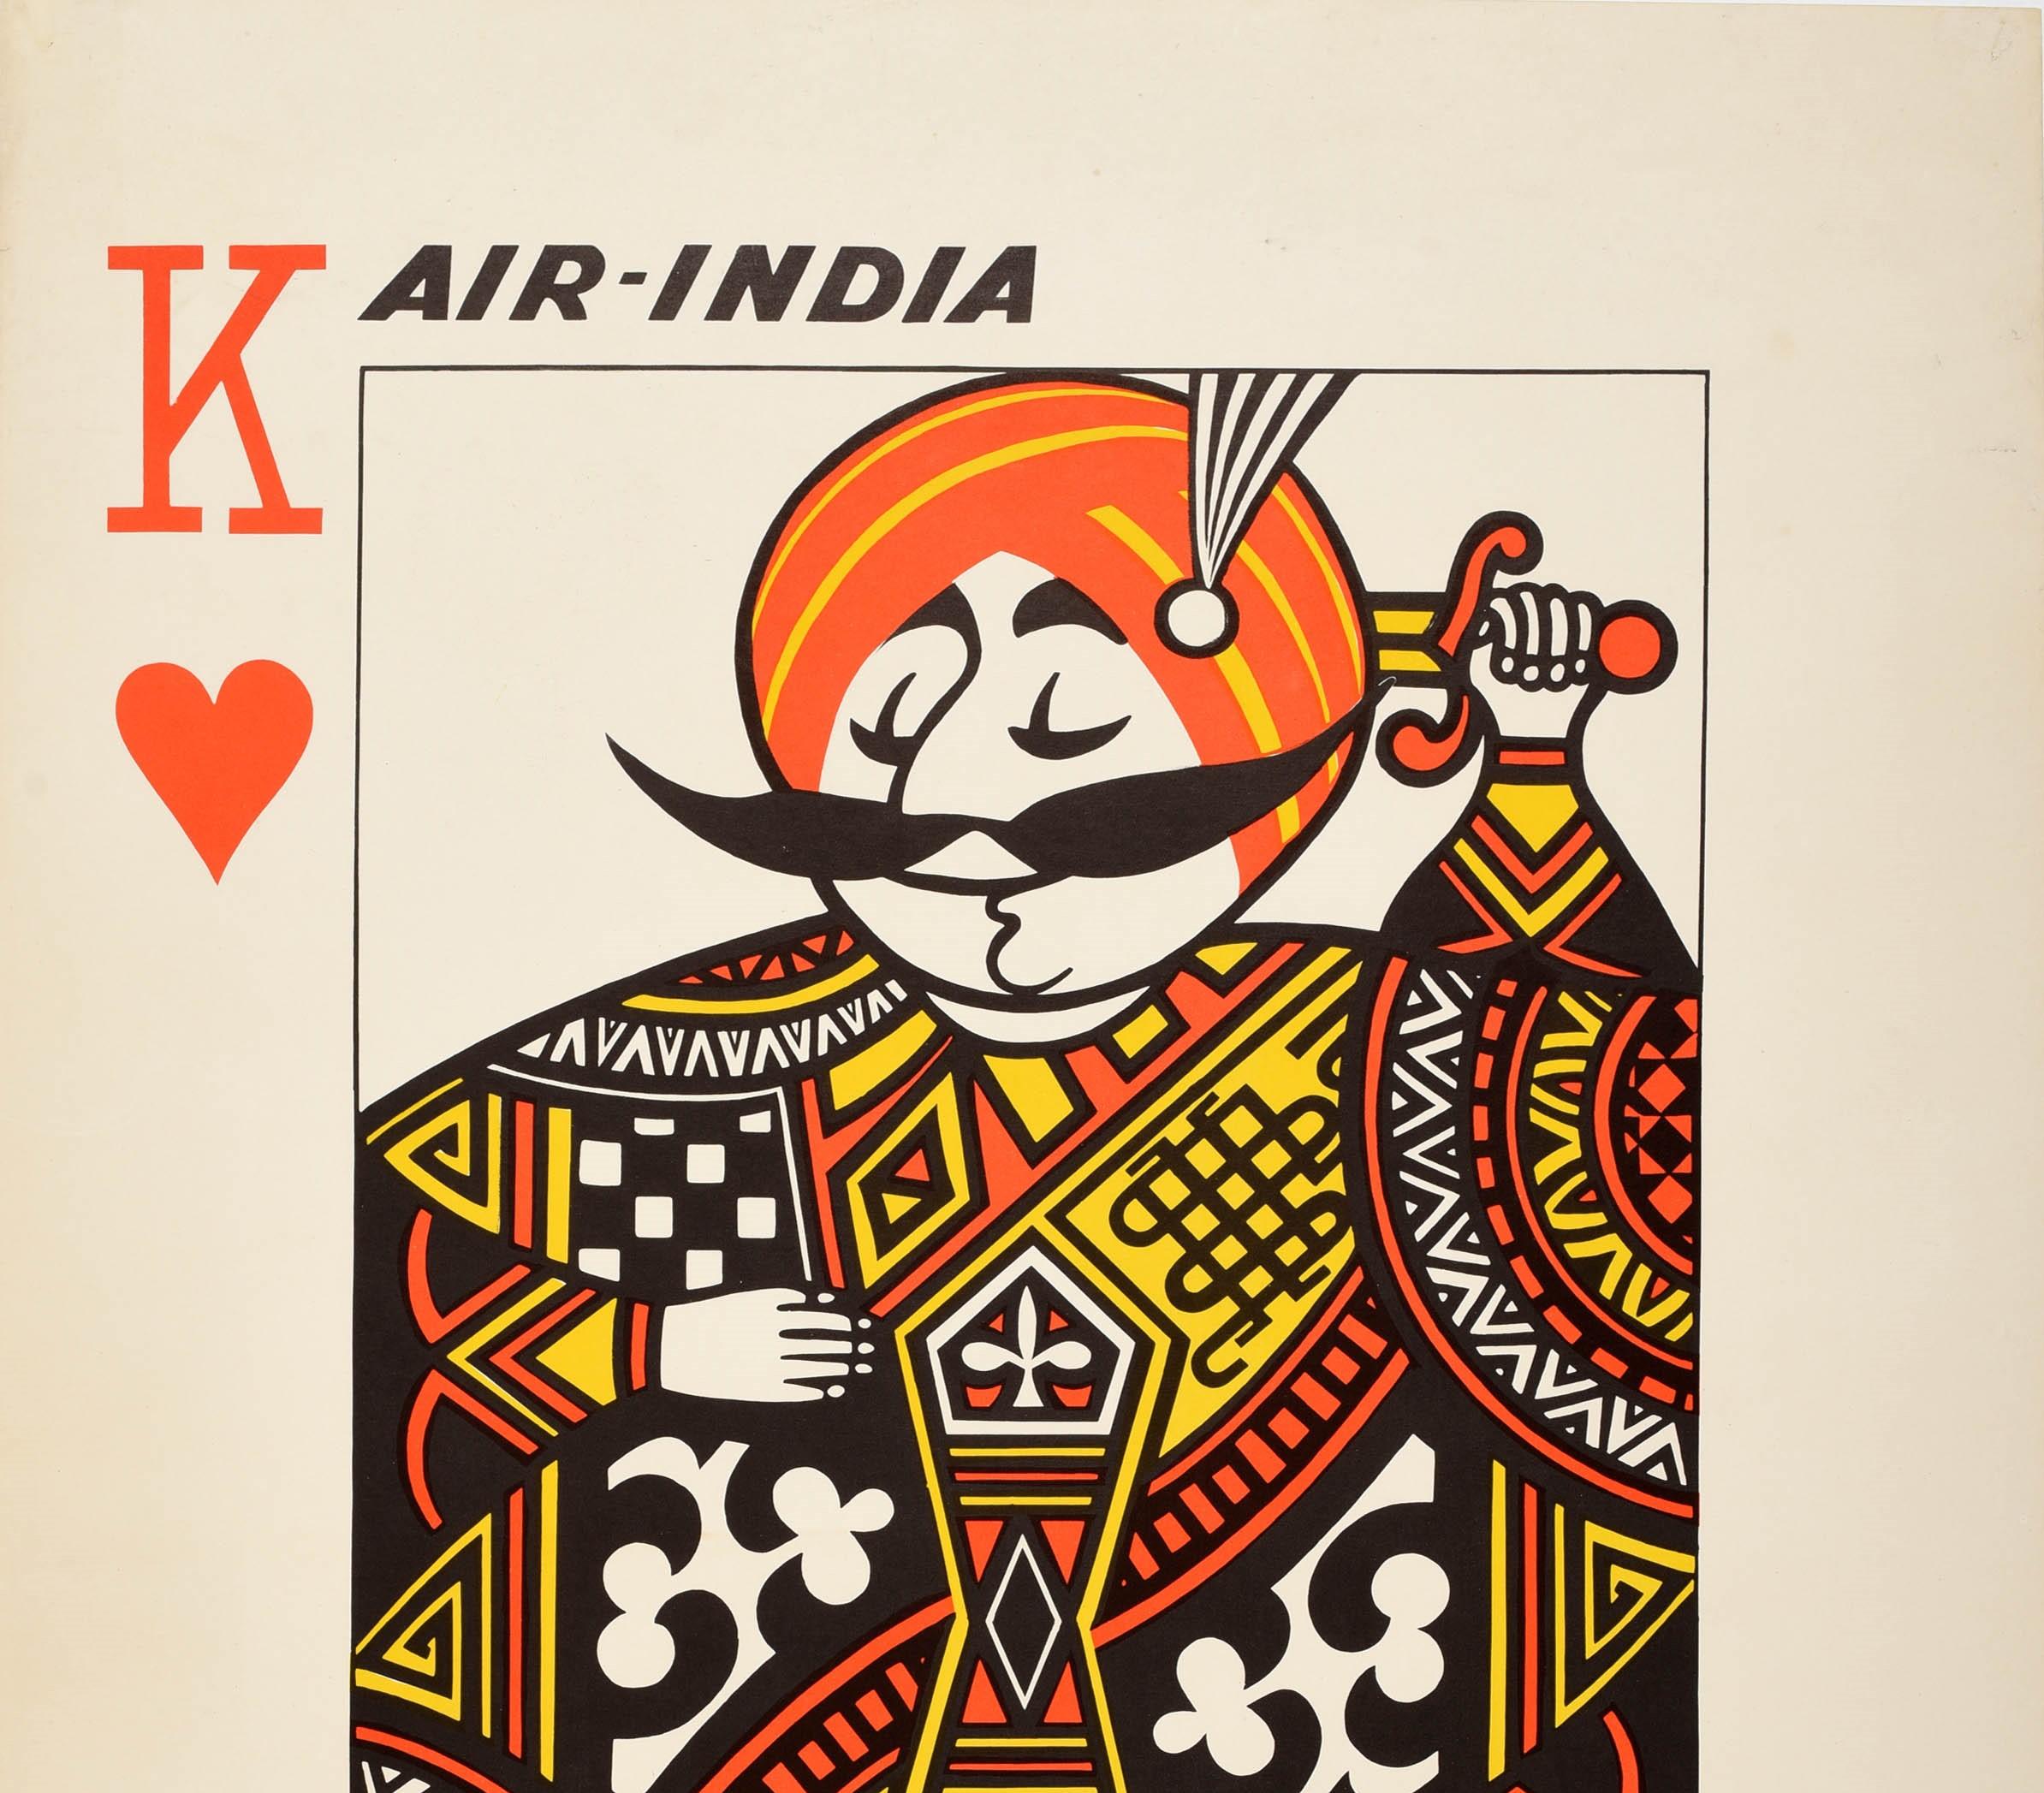 Original vintage travel advertising poster for Air India featuring the Air India Maharajah mascot (created in 1946 by Bobby Kooka and Umesh Rao), in the style of a King of Hearts playing card holding a sword behind his head reflected with the